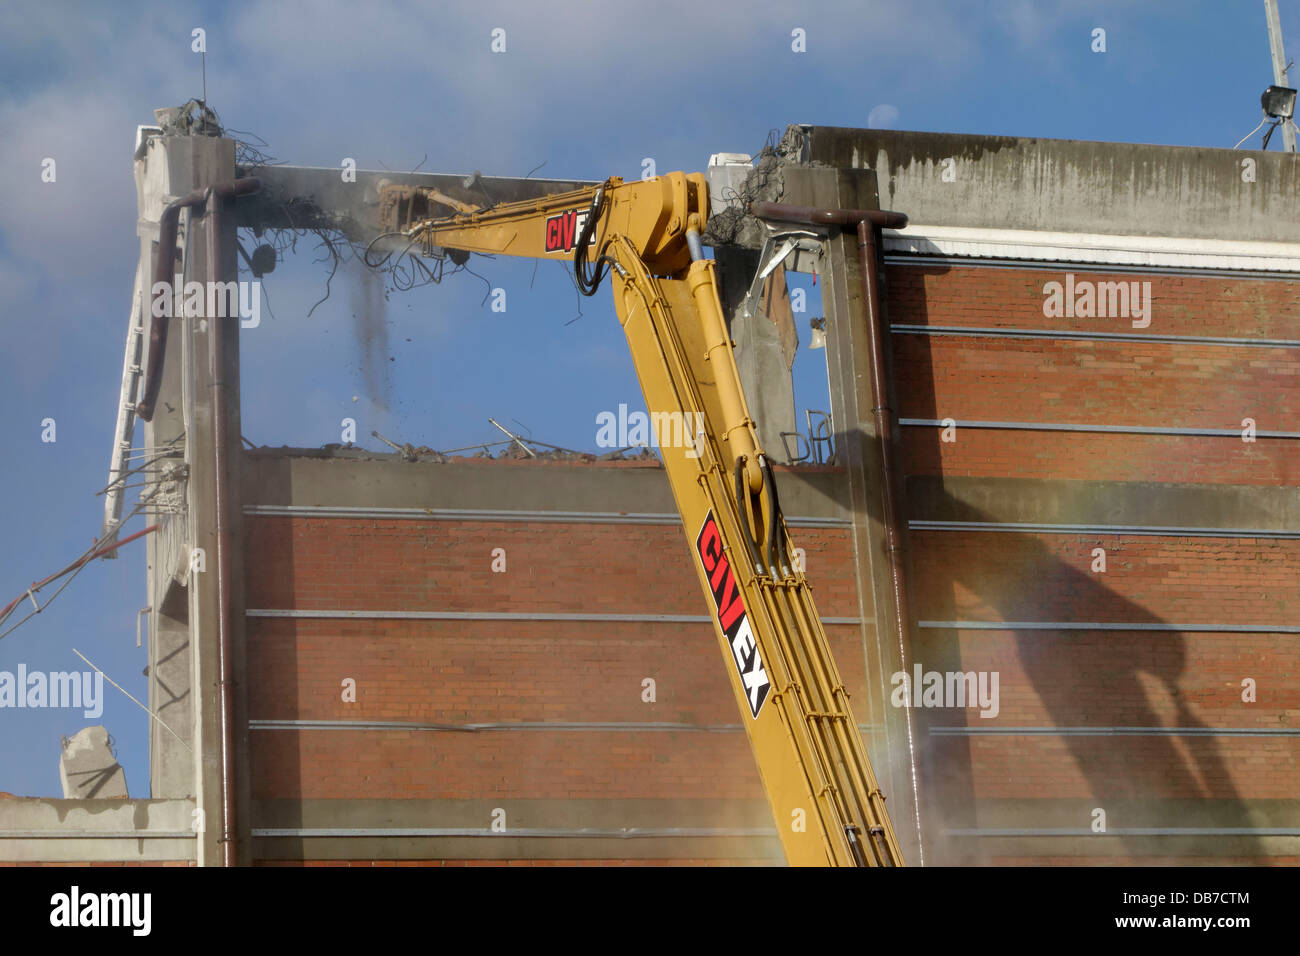 Demolition of the Perth Superdome building in July/ August 2013, Perth Western Australia Stock Photo